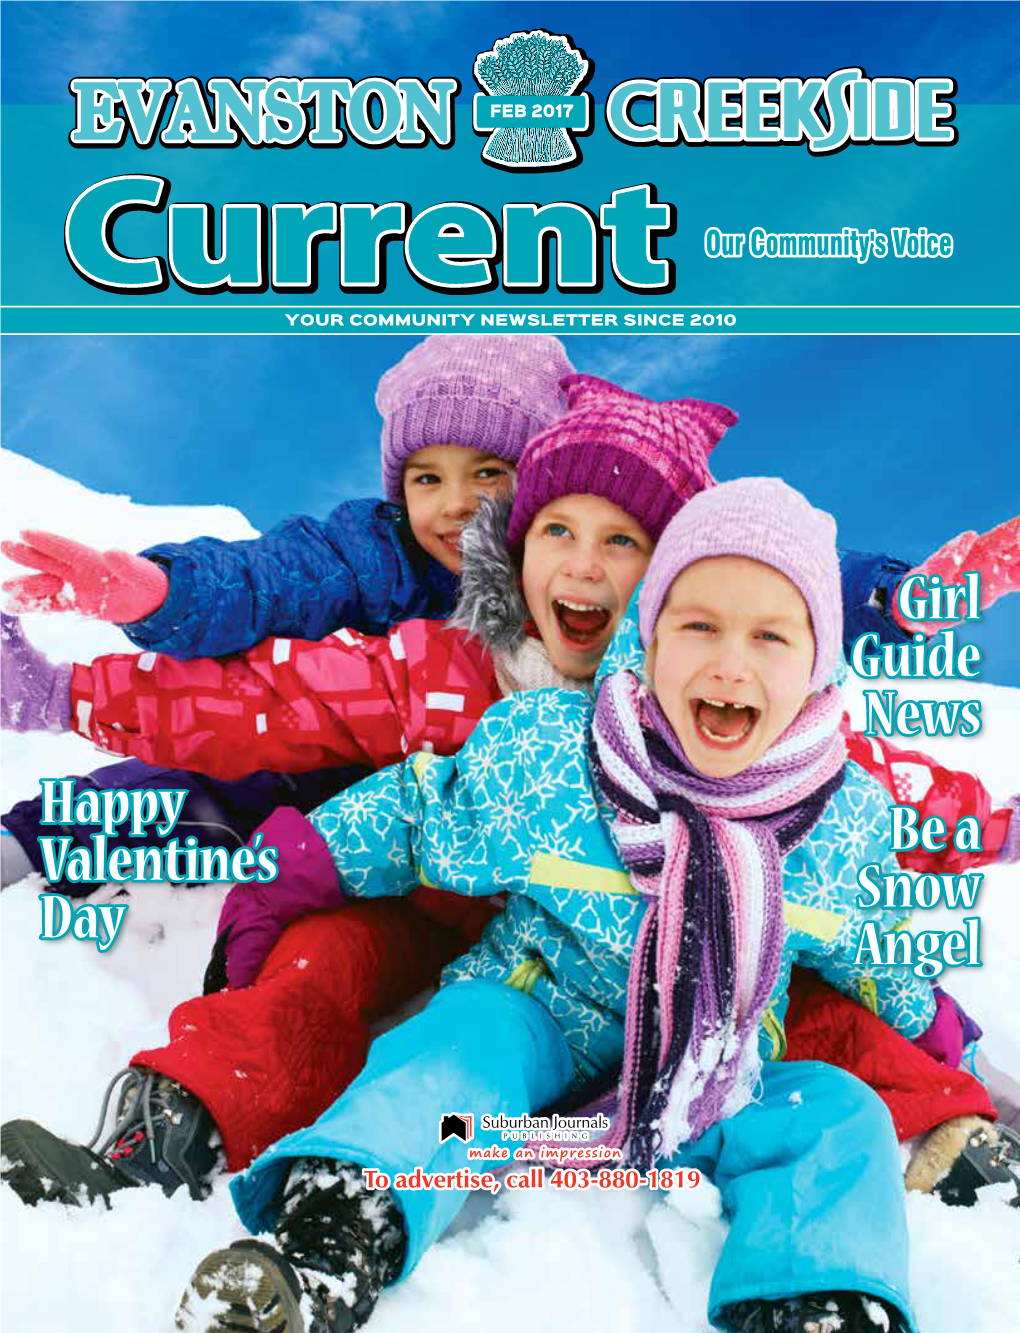 Girl Guide News Be a Snow Angel Happy Valentine's